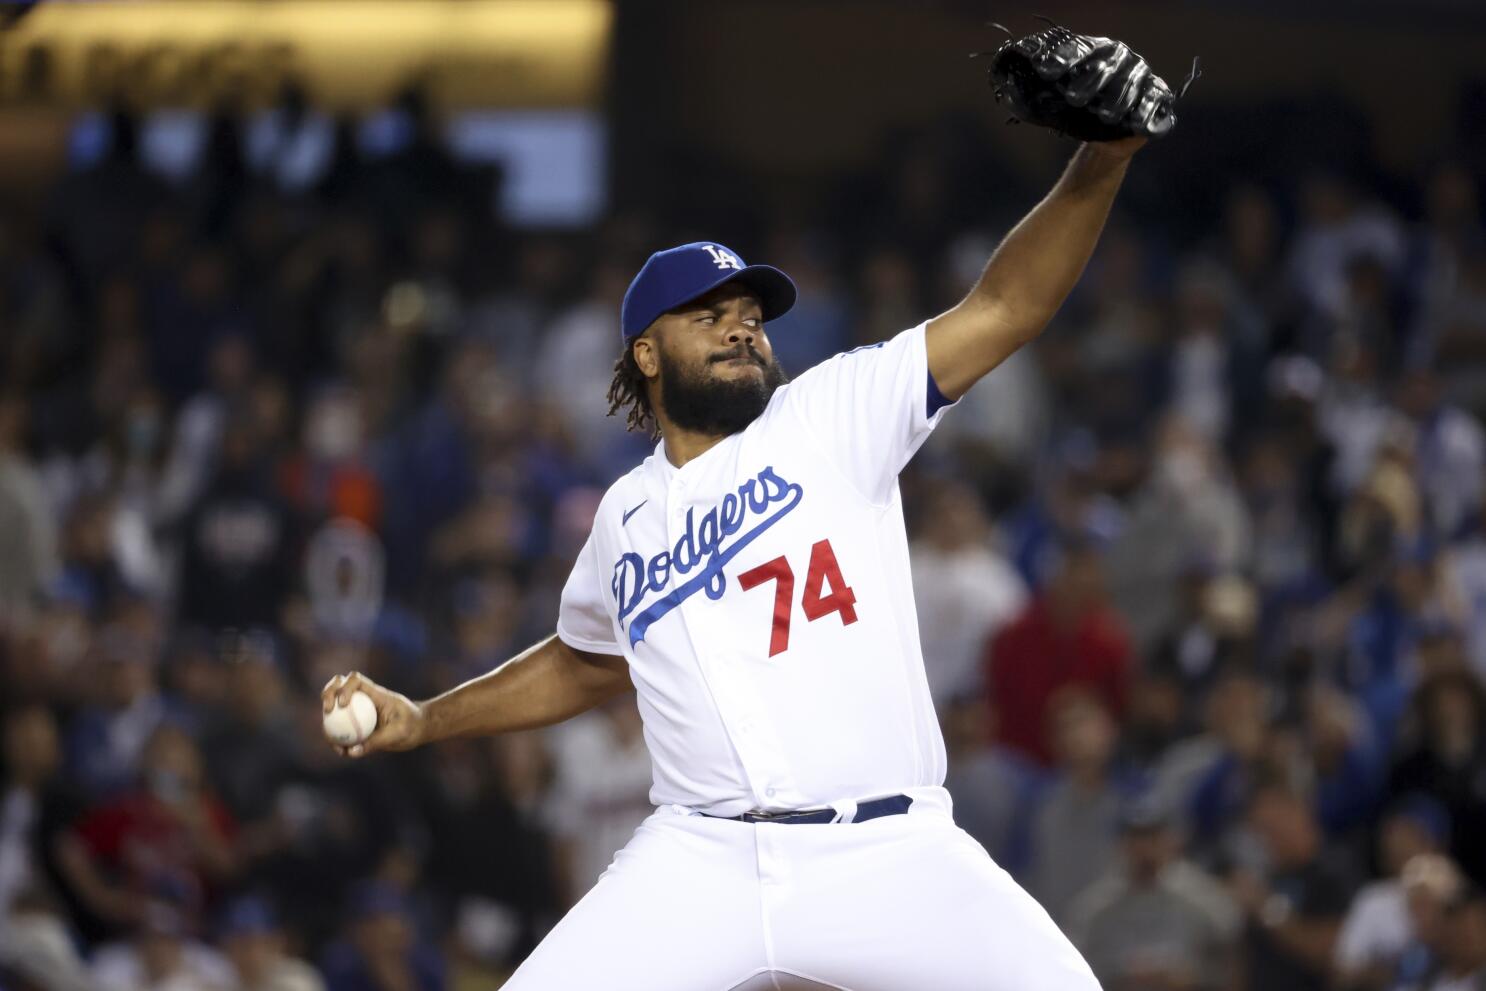 Dodgers' Kenley Jansen says he has stopped taking medication that